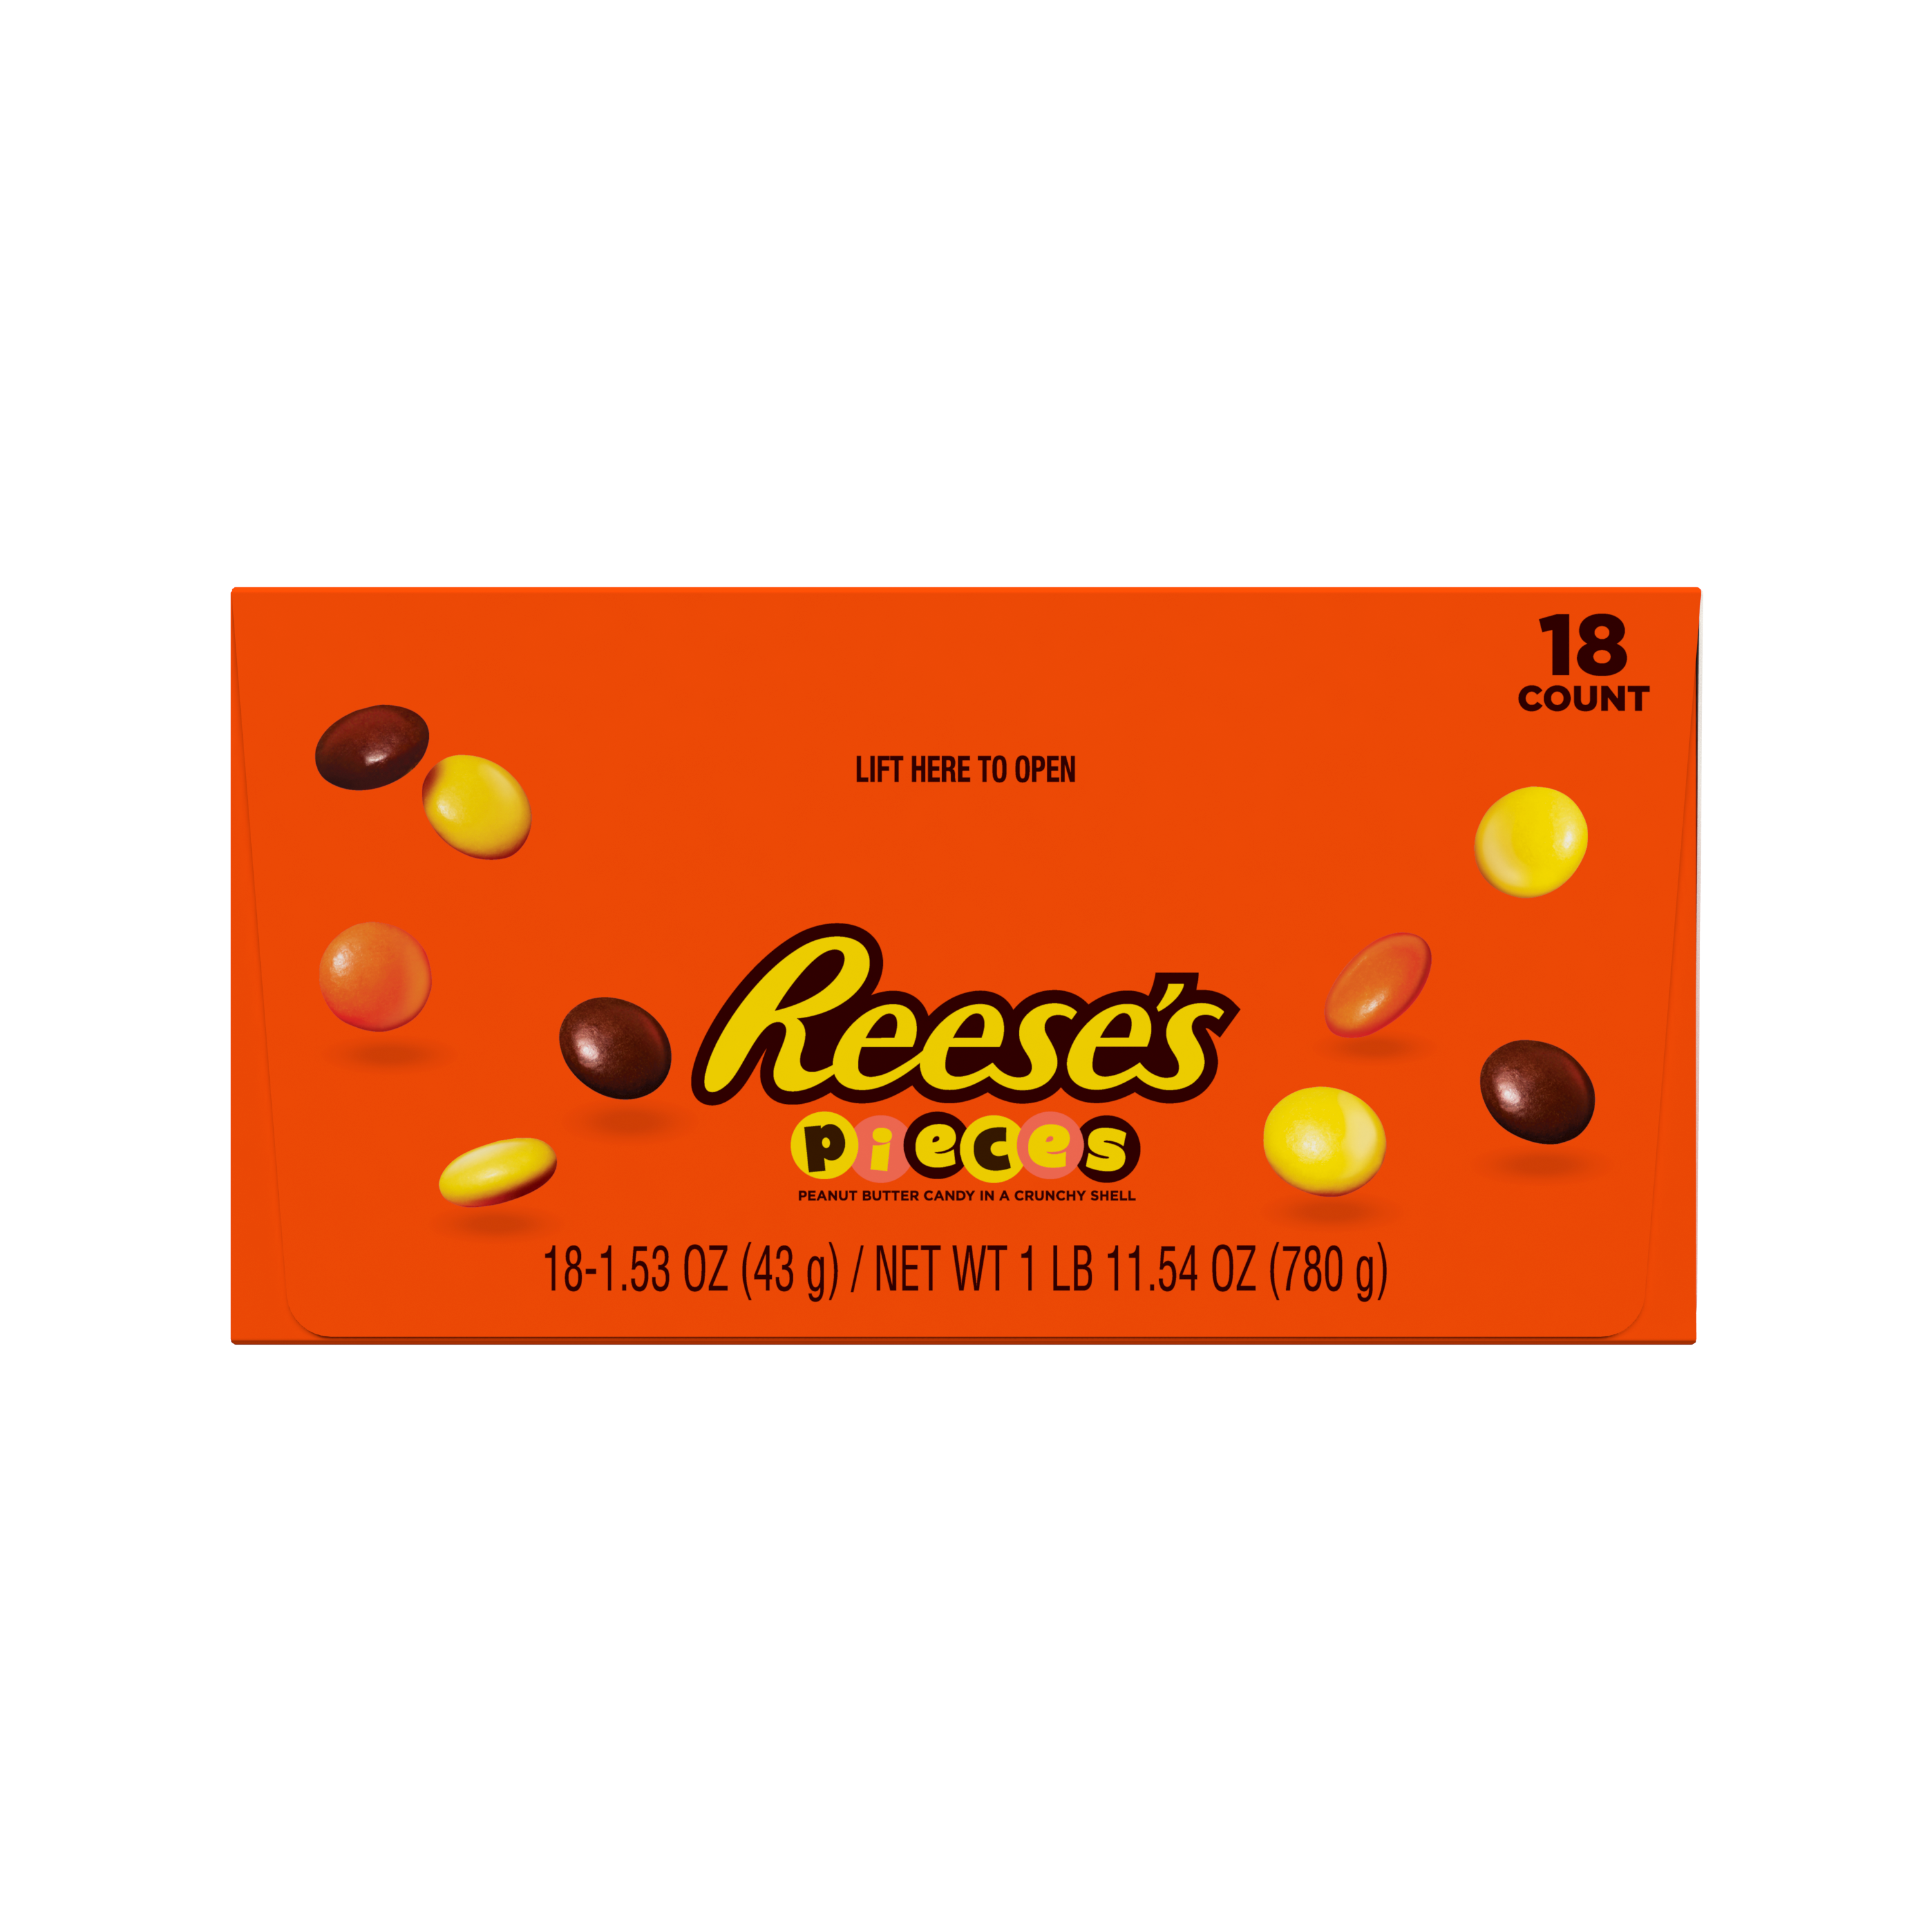 REESE'S PIECES Milk Chocolate Peanut Butter Candy, 1.53 oz box, 18 count - Front of Package